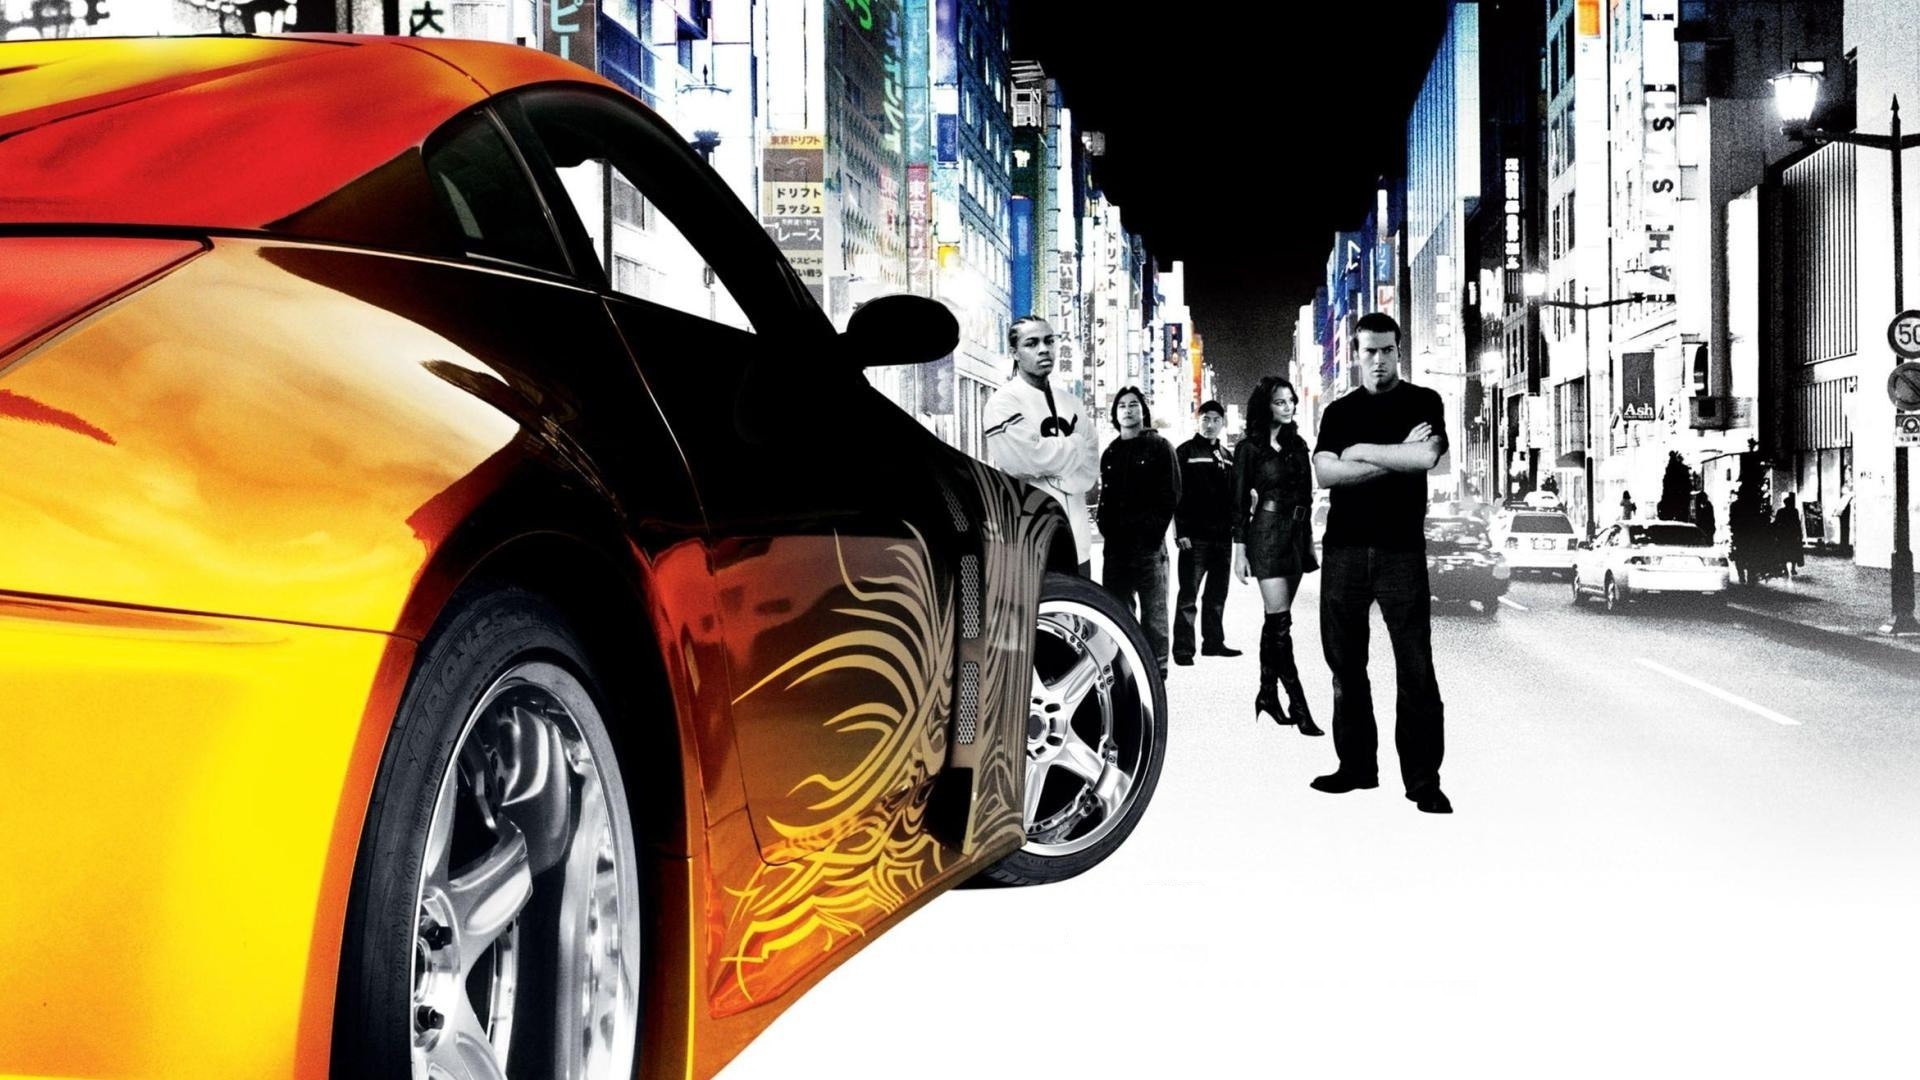 Movie The Fast And The Furious: Tokyo Drift HD Wallpaper Background Image.